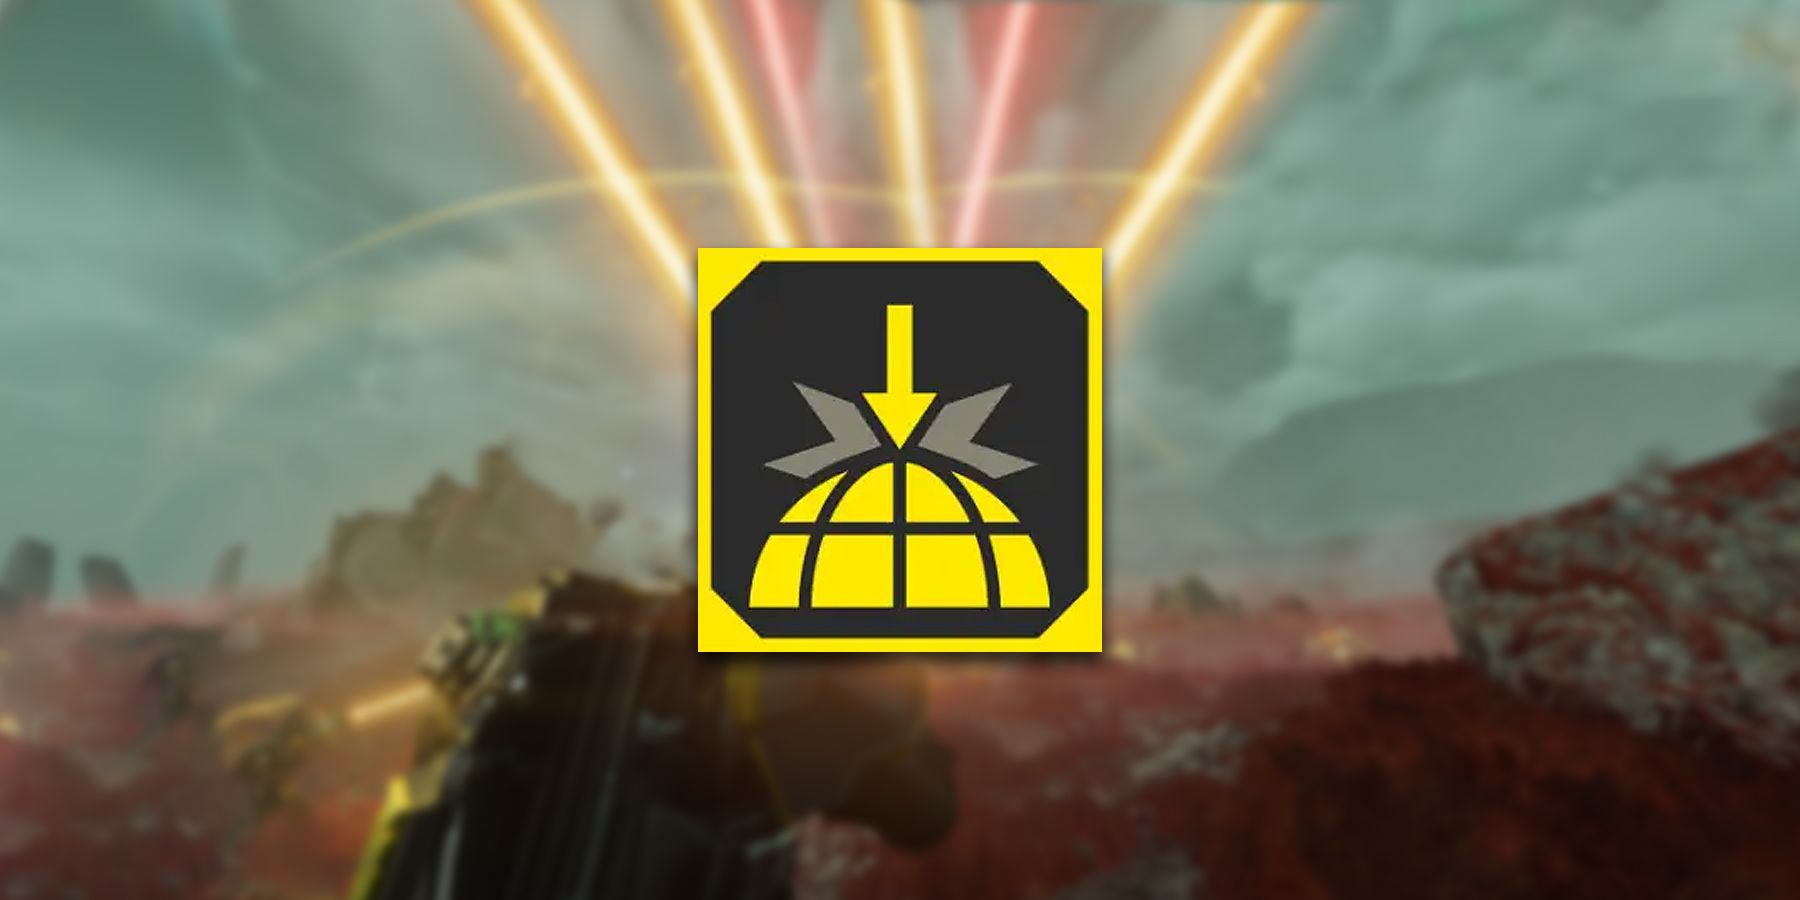 helldivers 2: it's the only way to be sure achievement/trophy guide (have 6 orbital barrages at once)